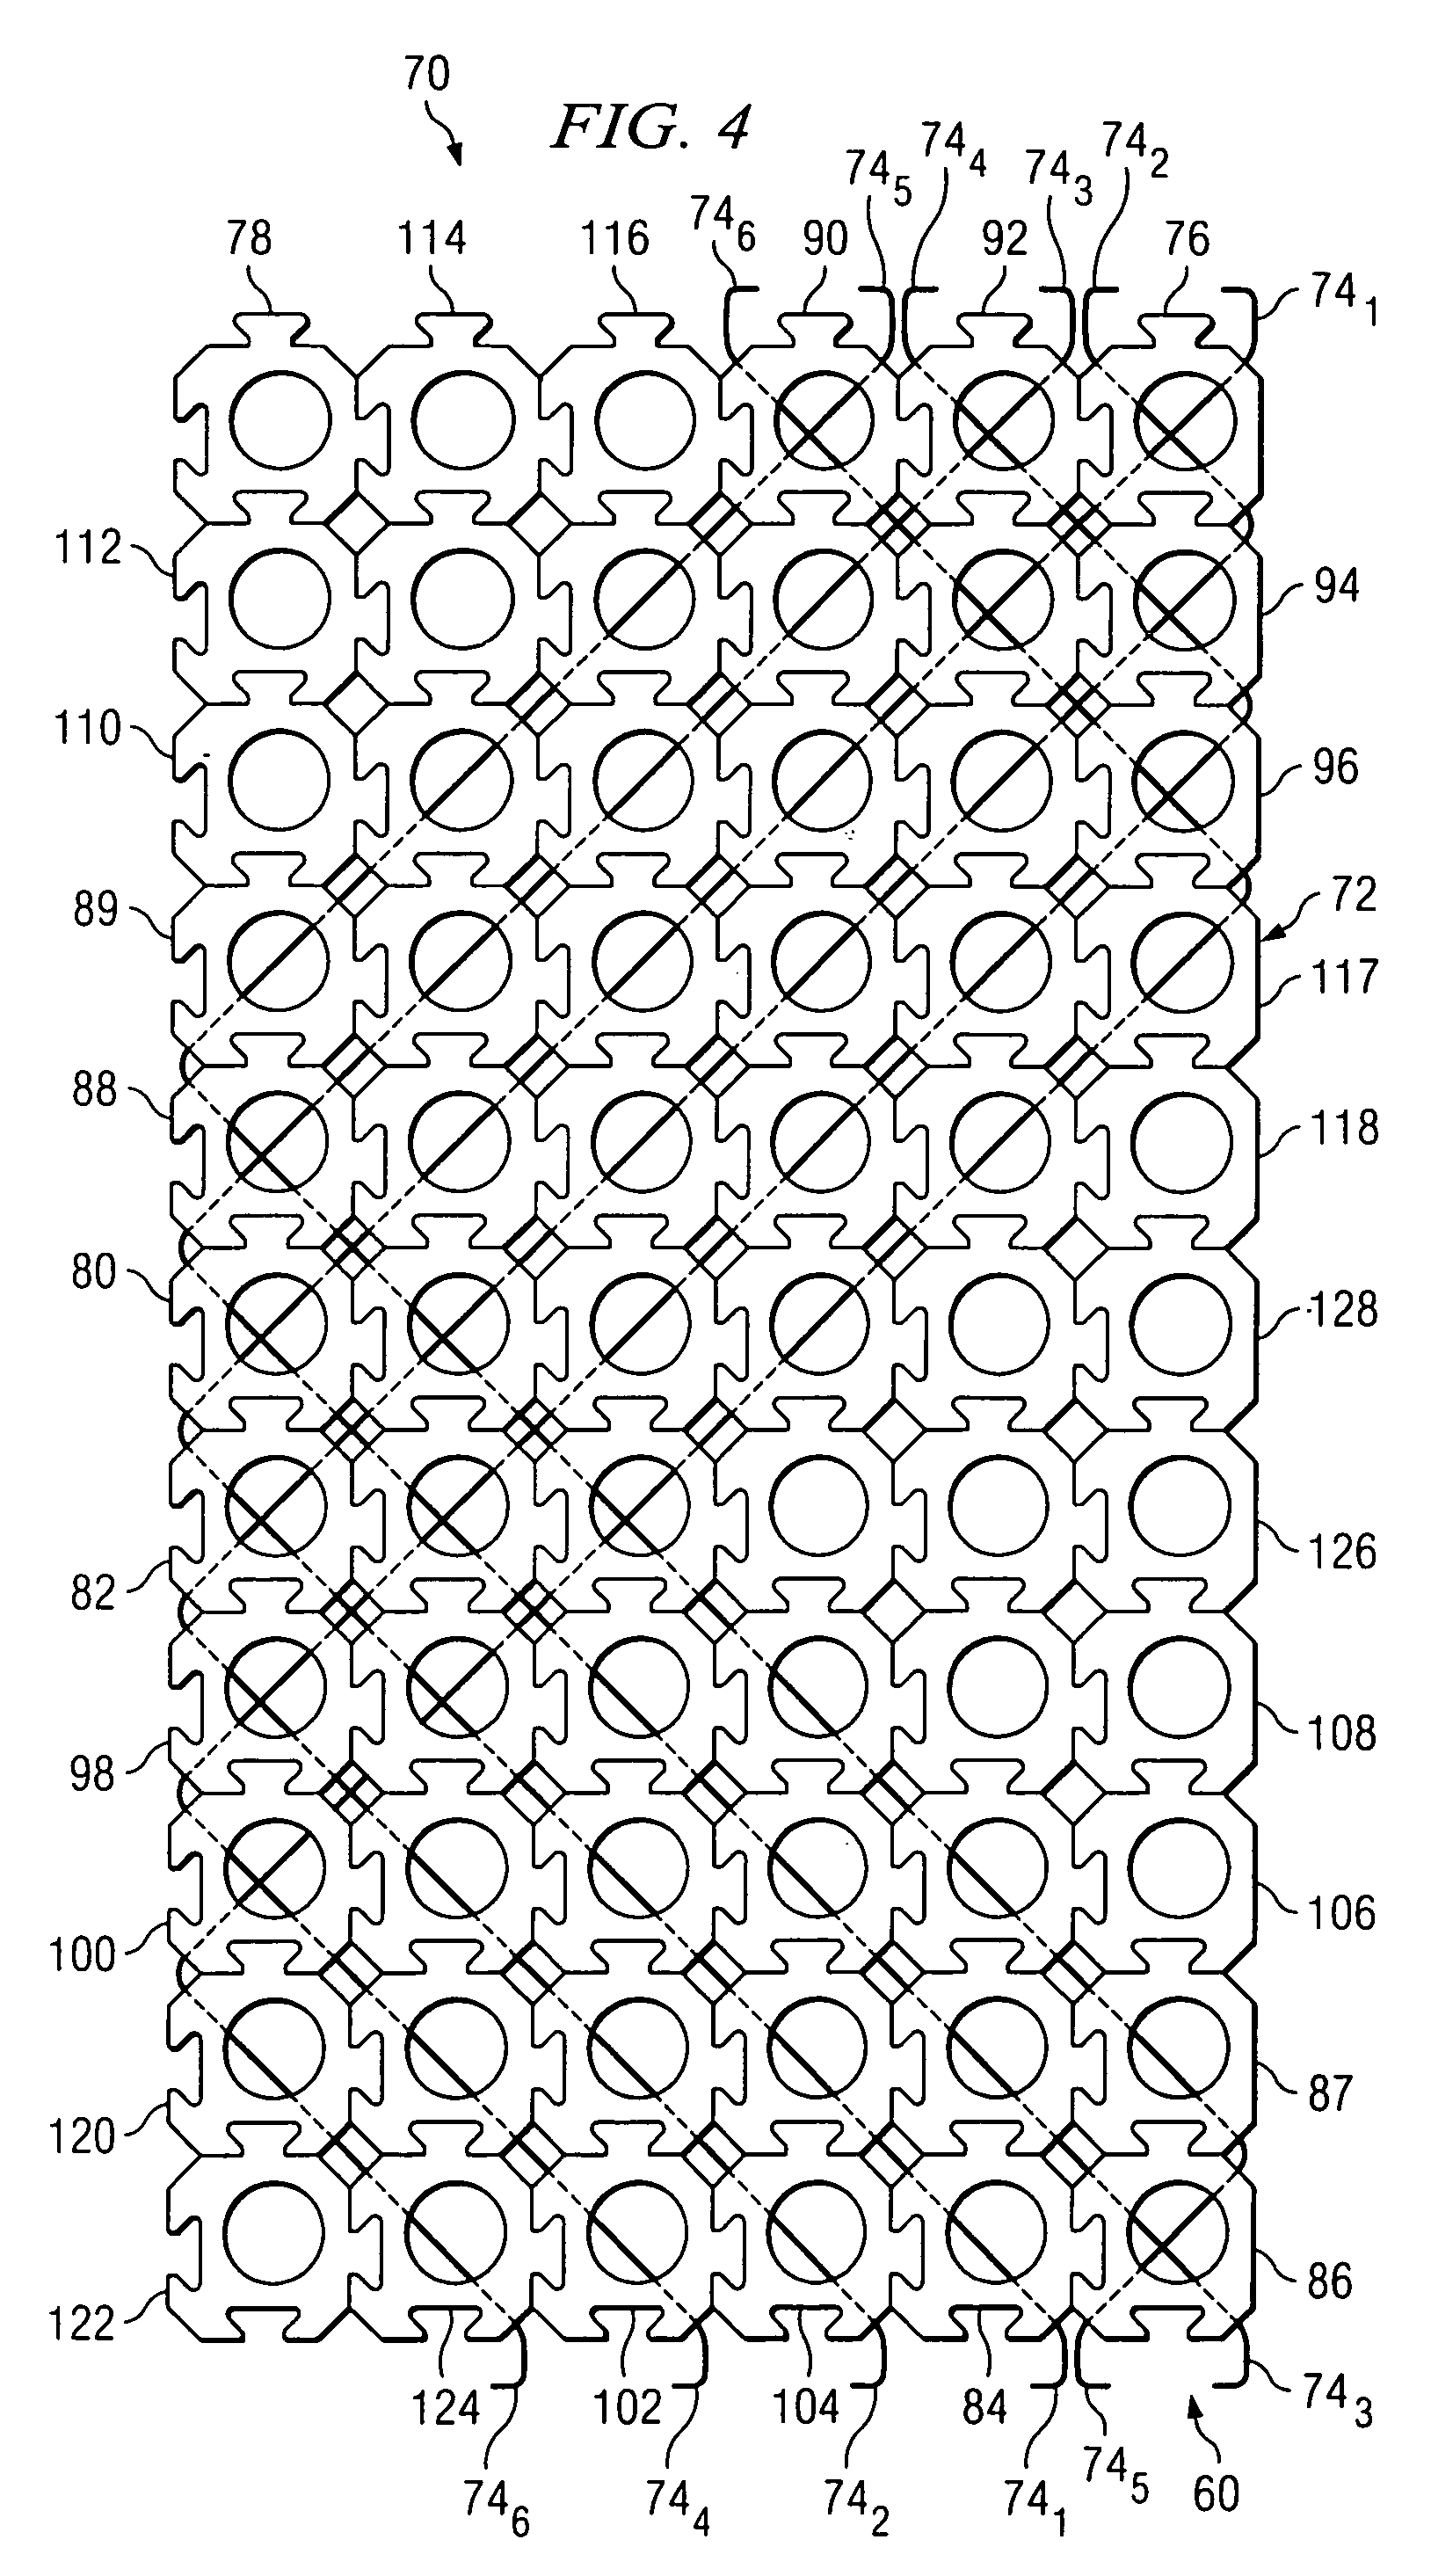 Interlocking erosion control block with diagonal cable channels